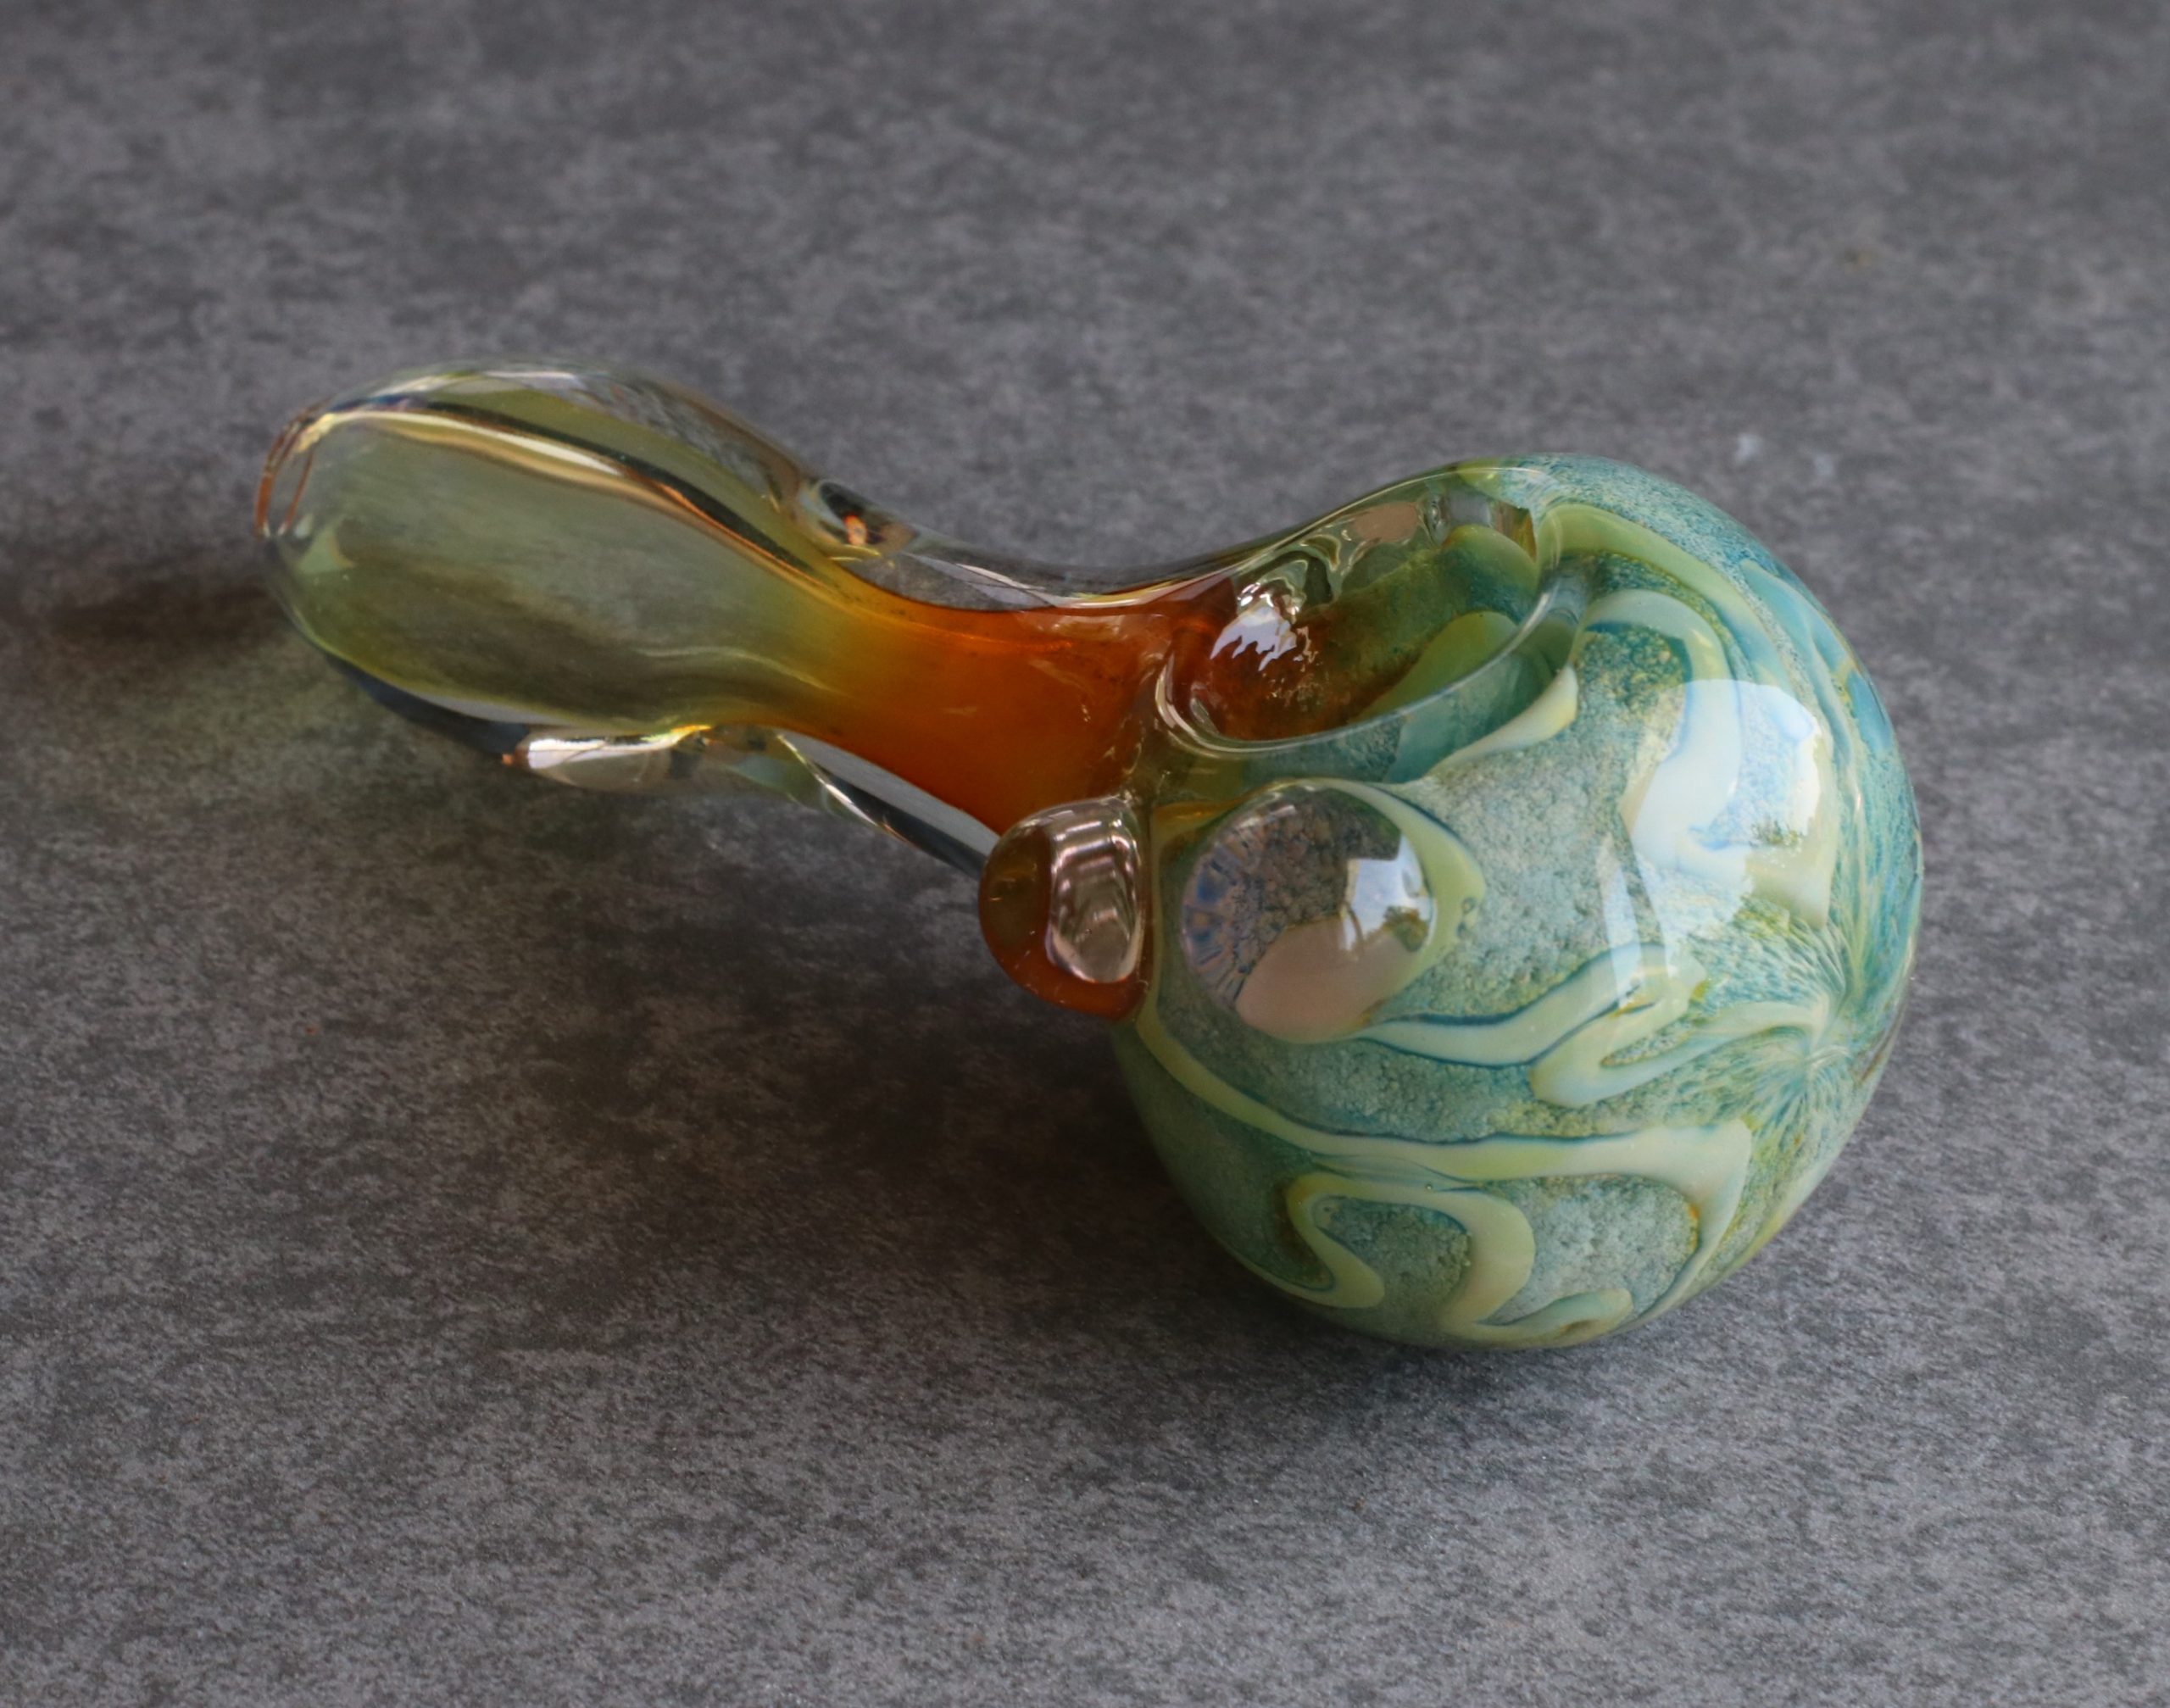 How glass pipes are made